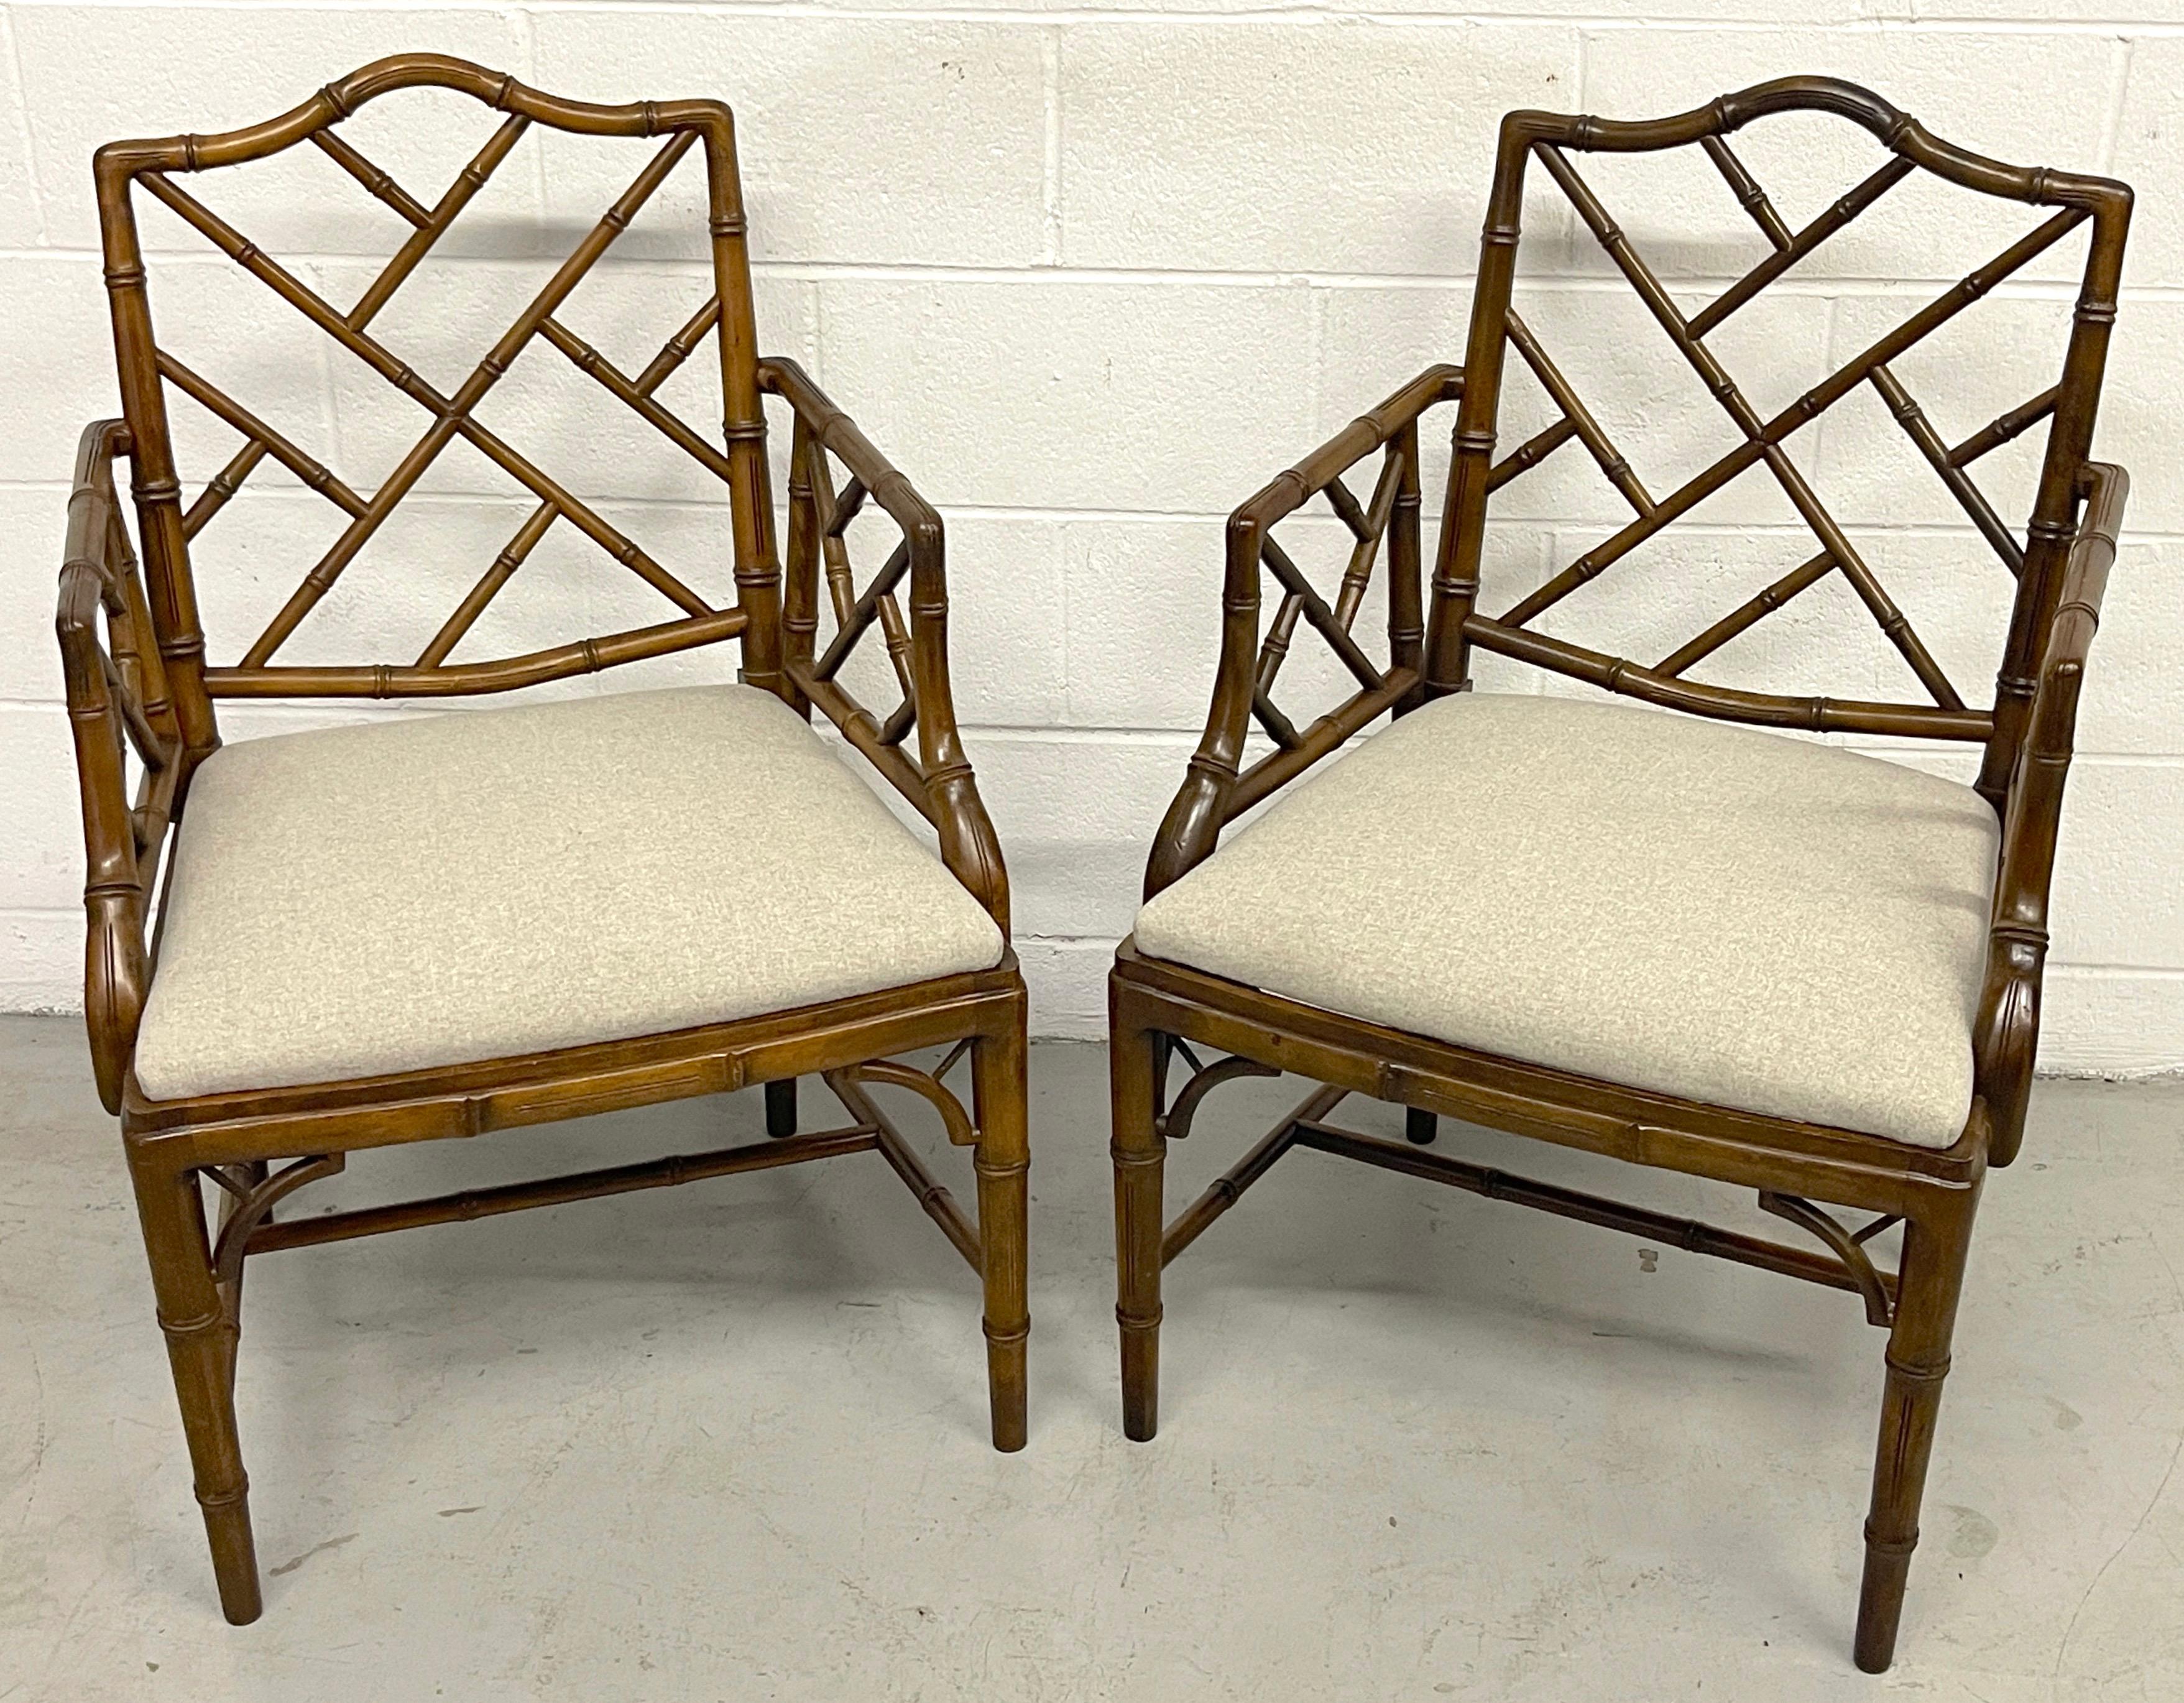 Pair Faux Bamboo Chinese Chippendale Style Armchairs with Cashmere Blend Seats
England, Circa later 20th Century 

An exquisite pair of carved mahogany faux bois arm chairs in the Chinese Chippendale taste. finely carved and modled, better than